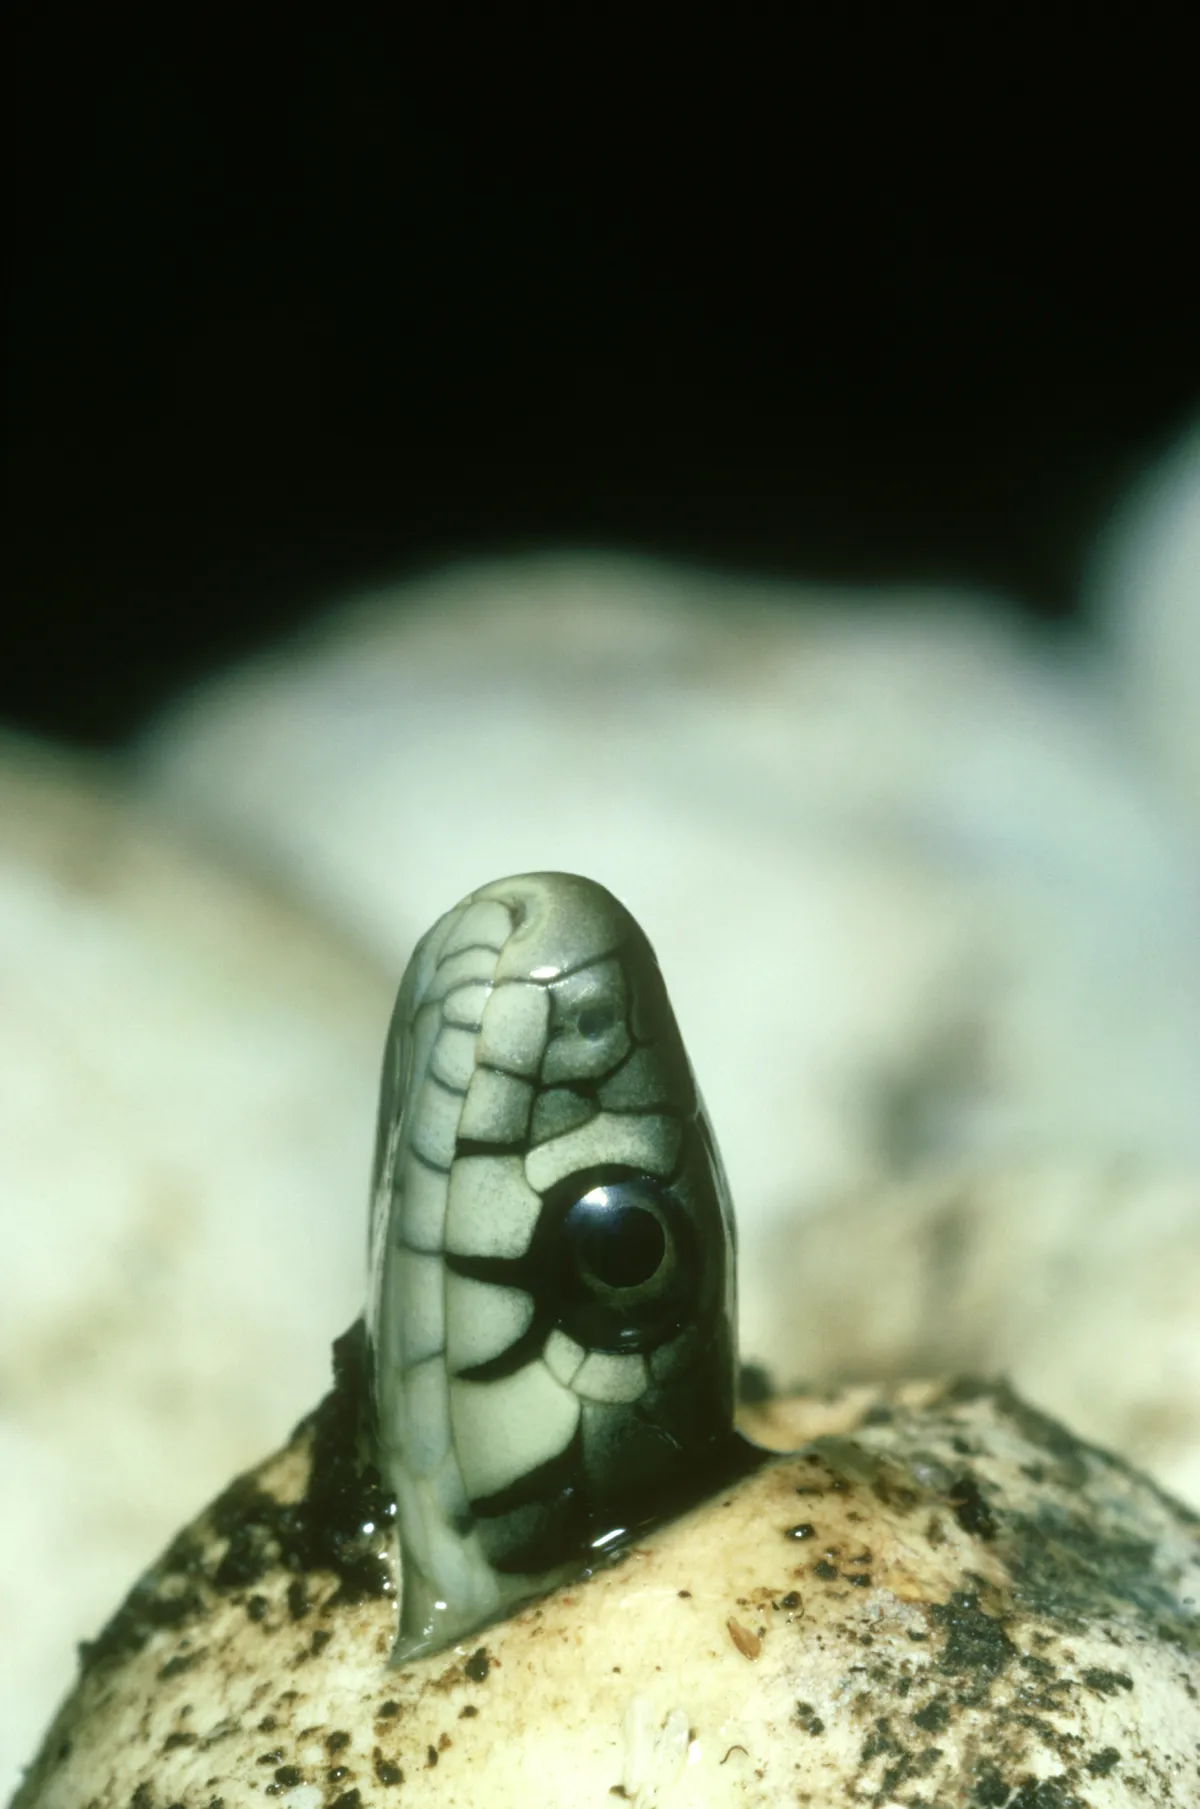 A baby grass snake emerging from its egg. © Tony Allen/Getty